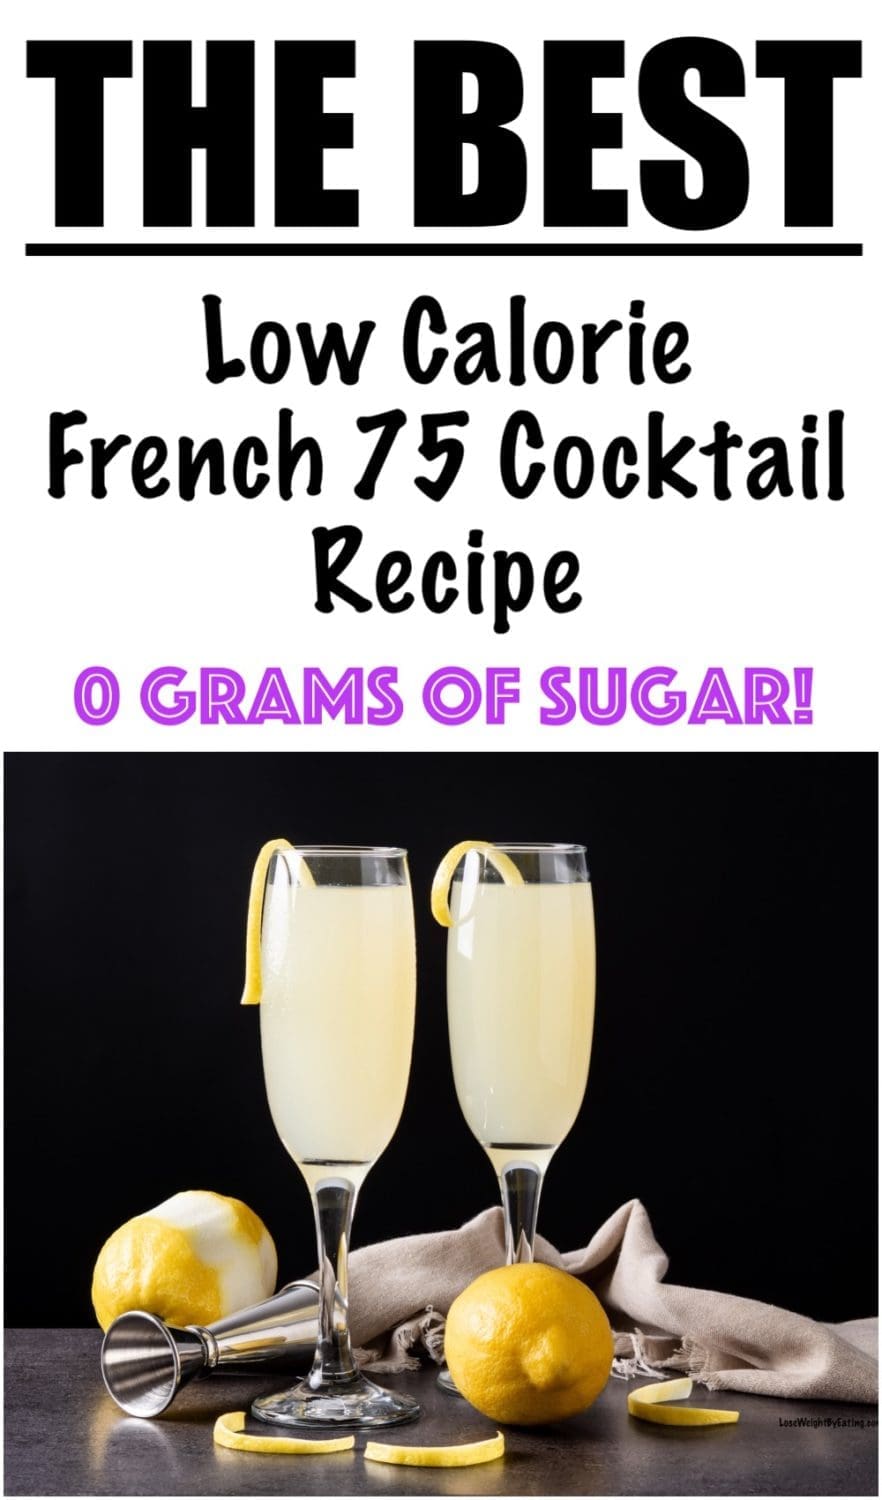 Low Calorie French 75 Cocktail Recipe